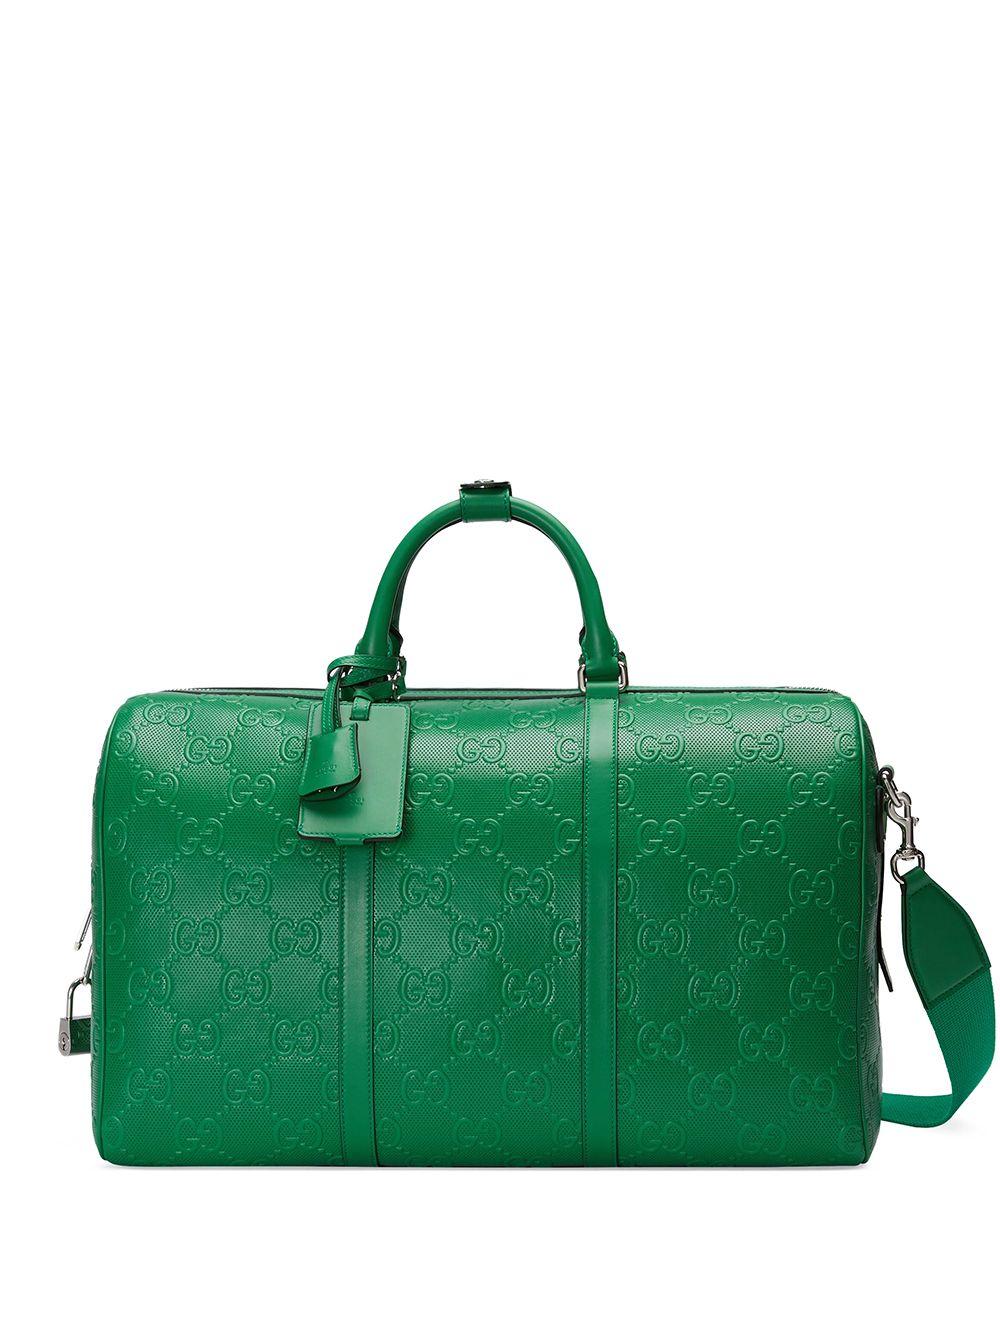 Gucci Large Duffle Bag With Web in Green for Men